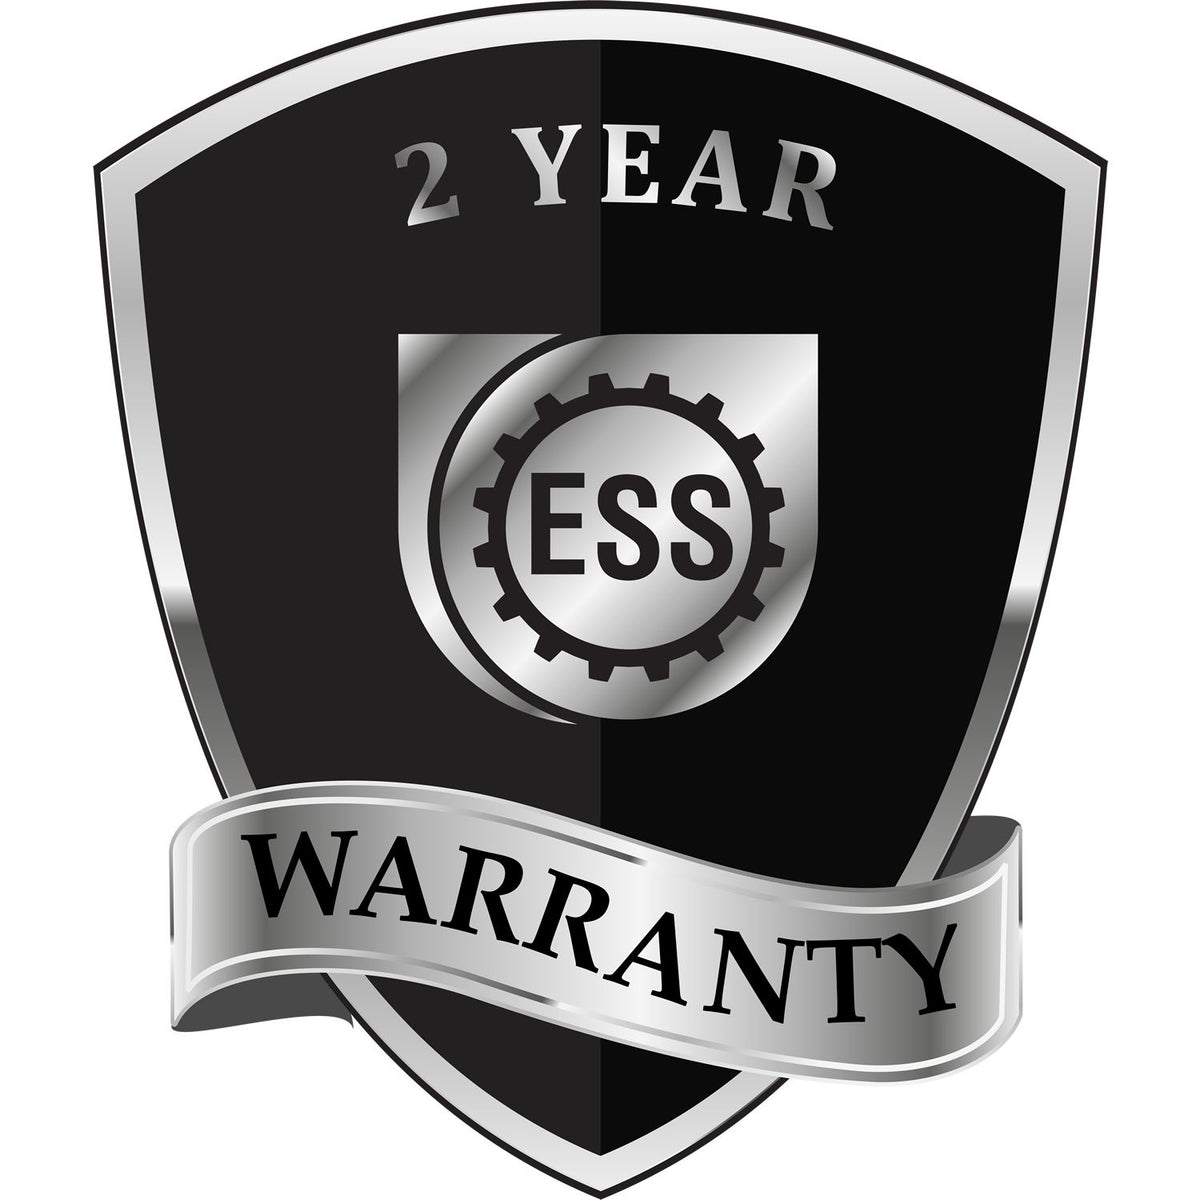 A black and silver badge or emblem showing warranty information for the Hybrid Guam Architect Seal